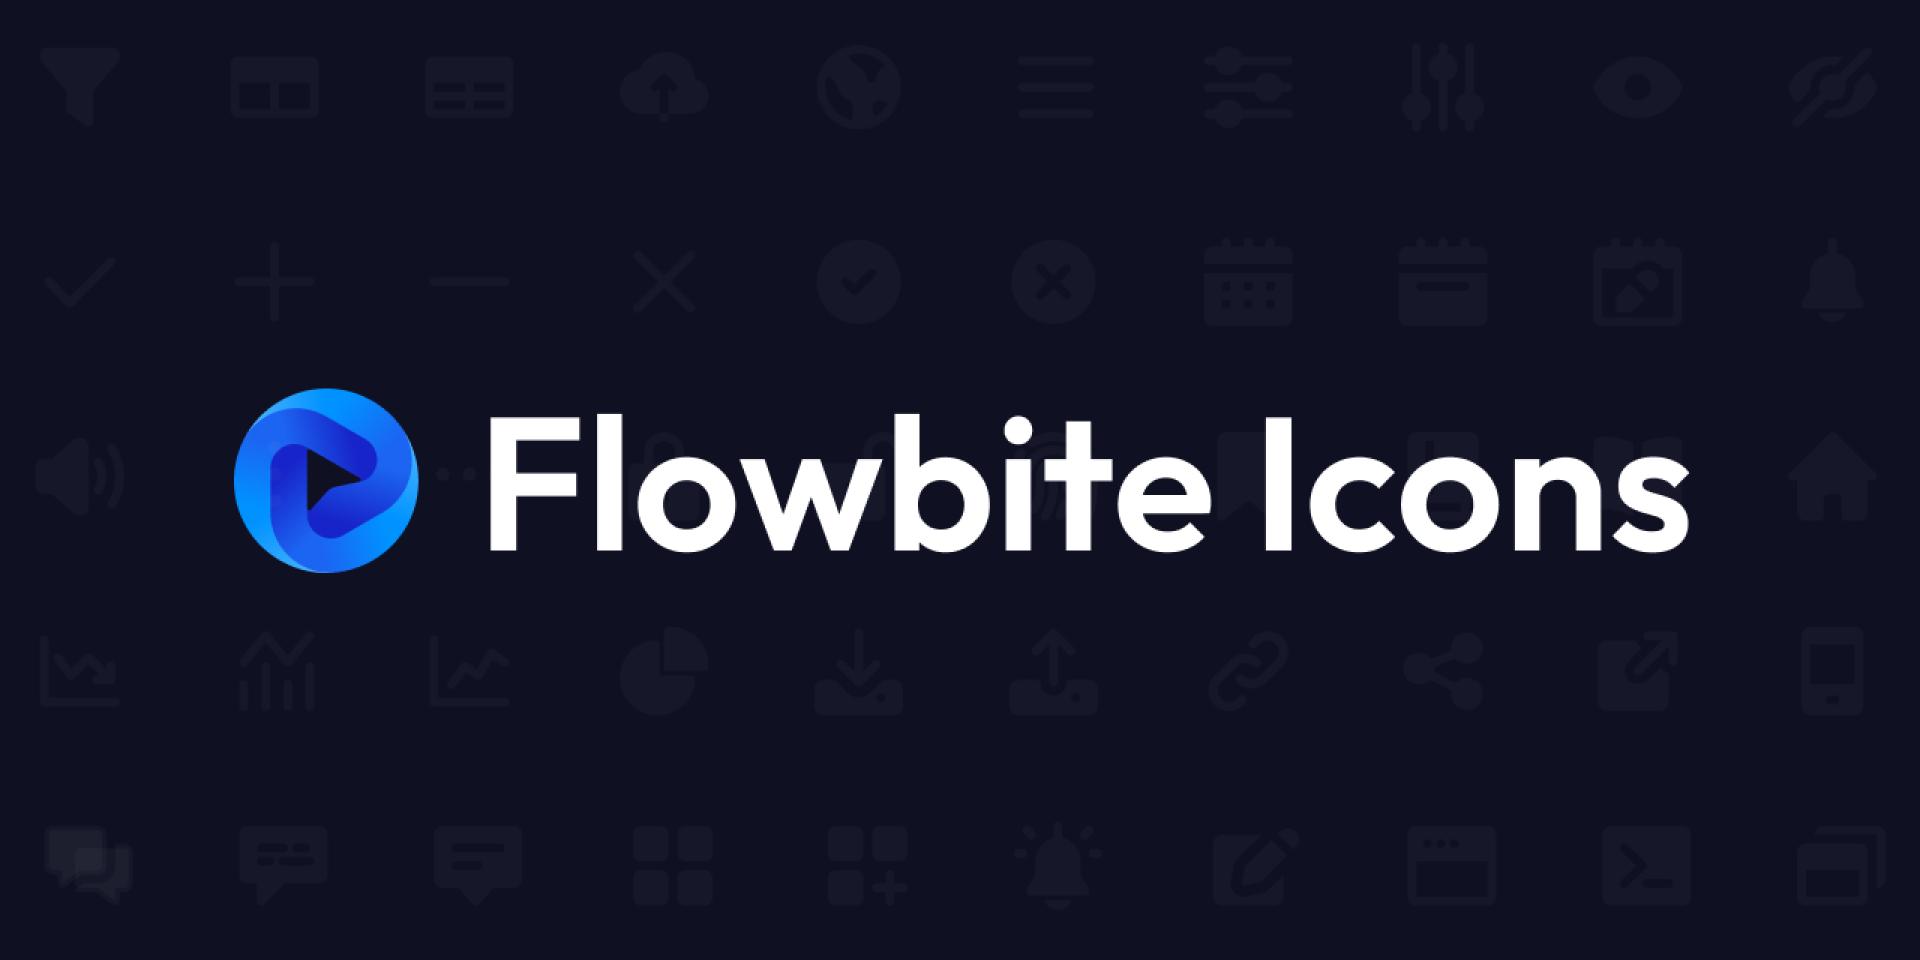 Flowbite Icons - free and open-source SVG icons